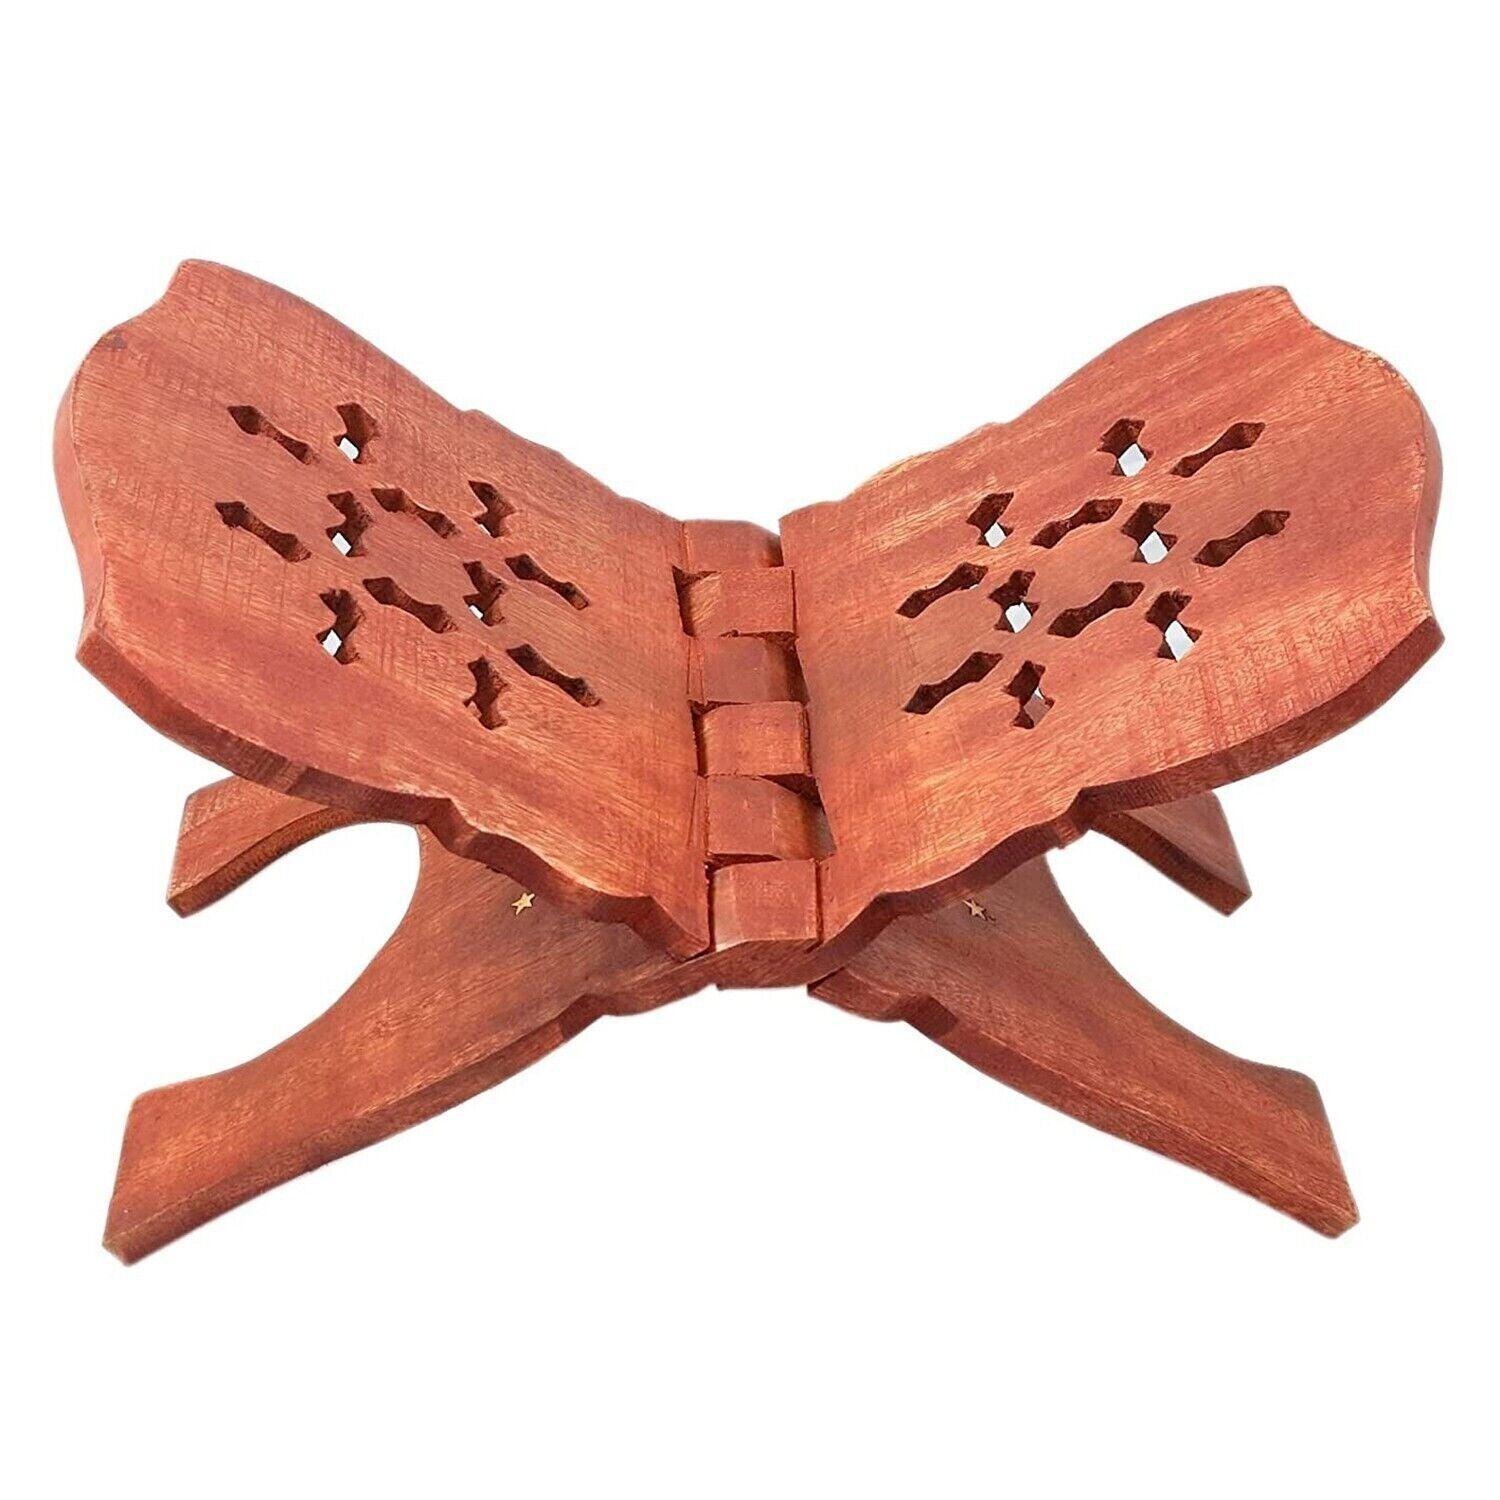 Handmade Assorted Wooden Polished Rehal/Qur'an Stand For Reading Books (Multicolor, Rehal) - Walgrow.com